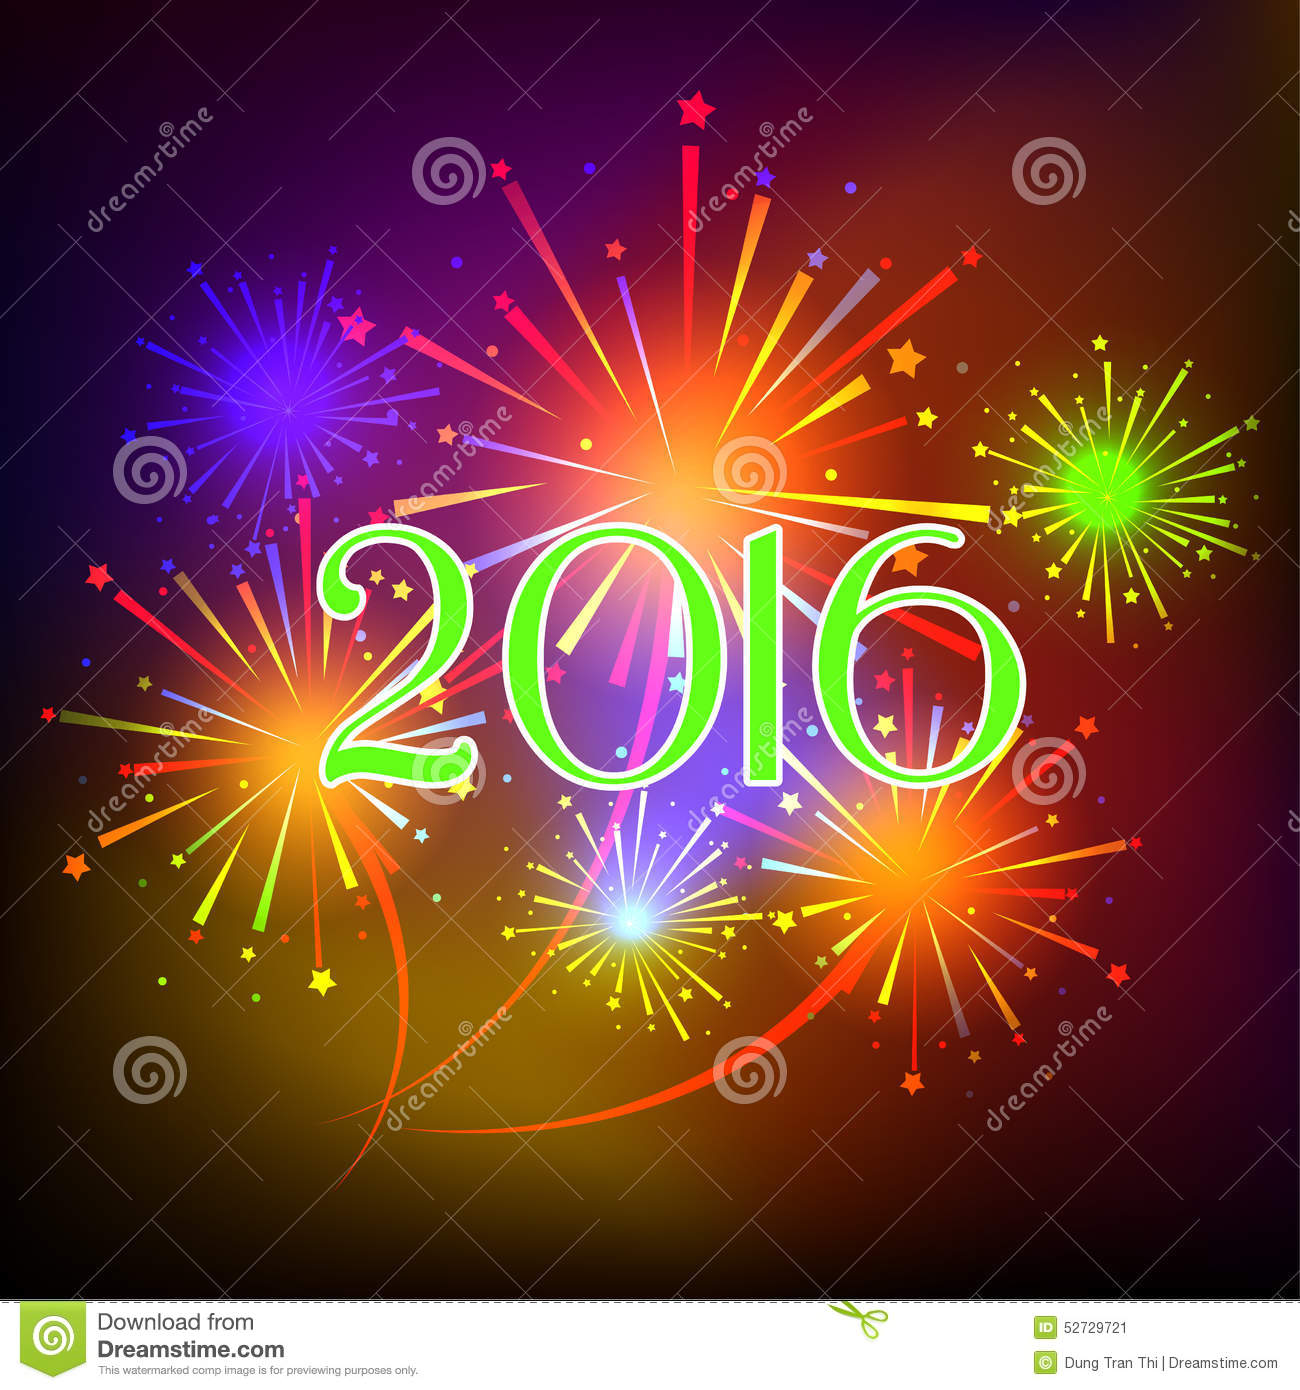 Happy New Year Image HD Wallpaper Puter